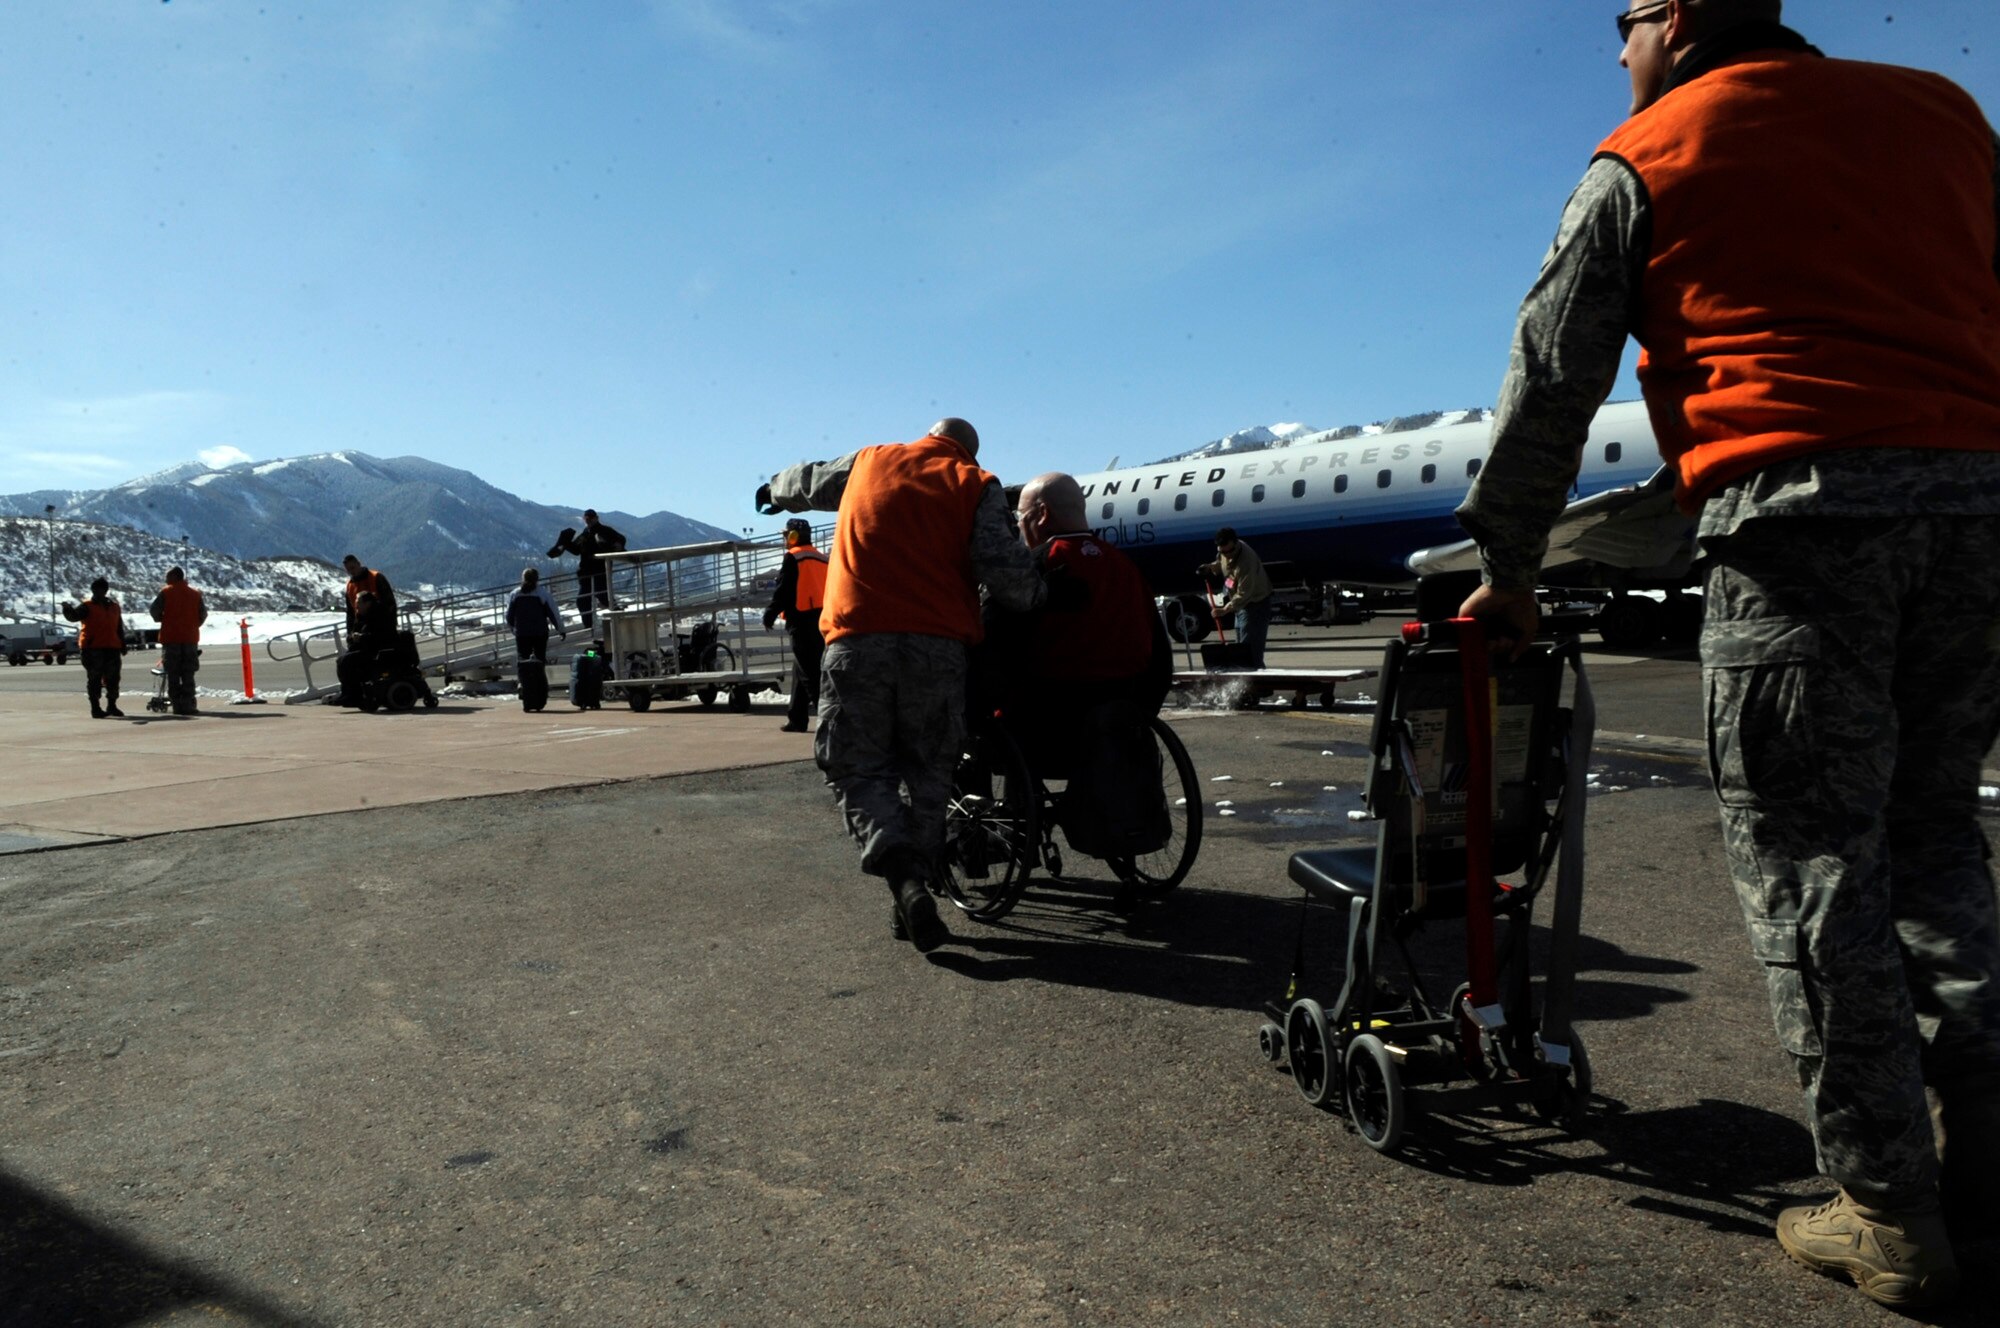 Airmen from Luke Air Force Base, Ariz. escort a veteran off a United aircraft March 28 at the Aspen Airport, Colo. Veterans from all over the world fly into Aspen to attend the Disabled American Veterans Winter Sports Clinic. (U.S. Air Force photo/Staff Sgt. Desiree N. Palacios)

